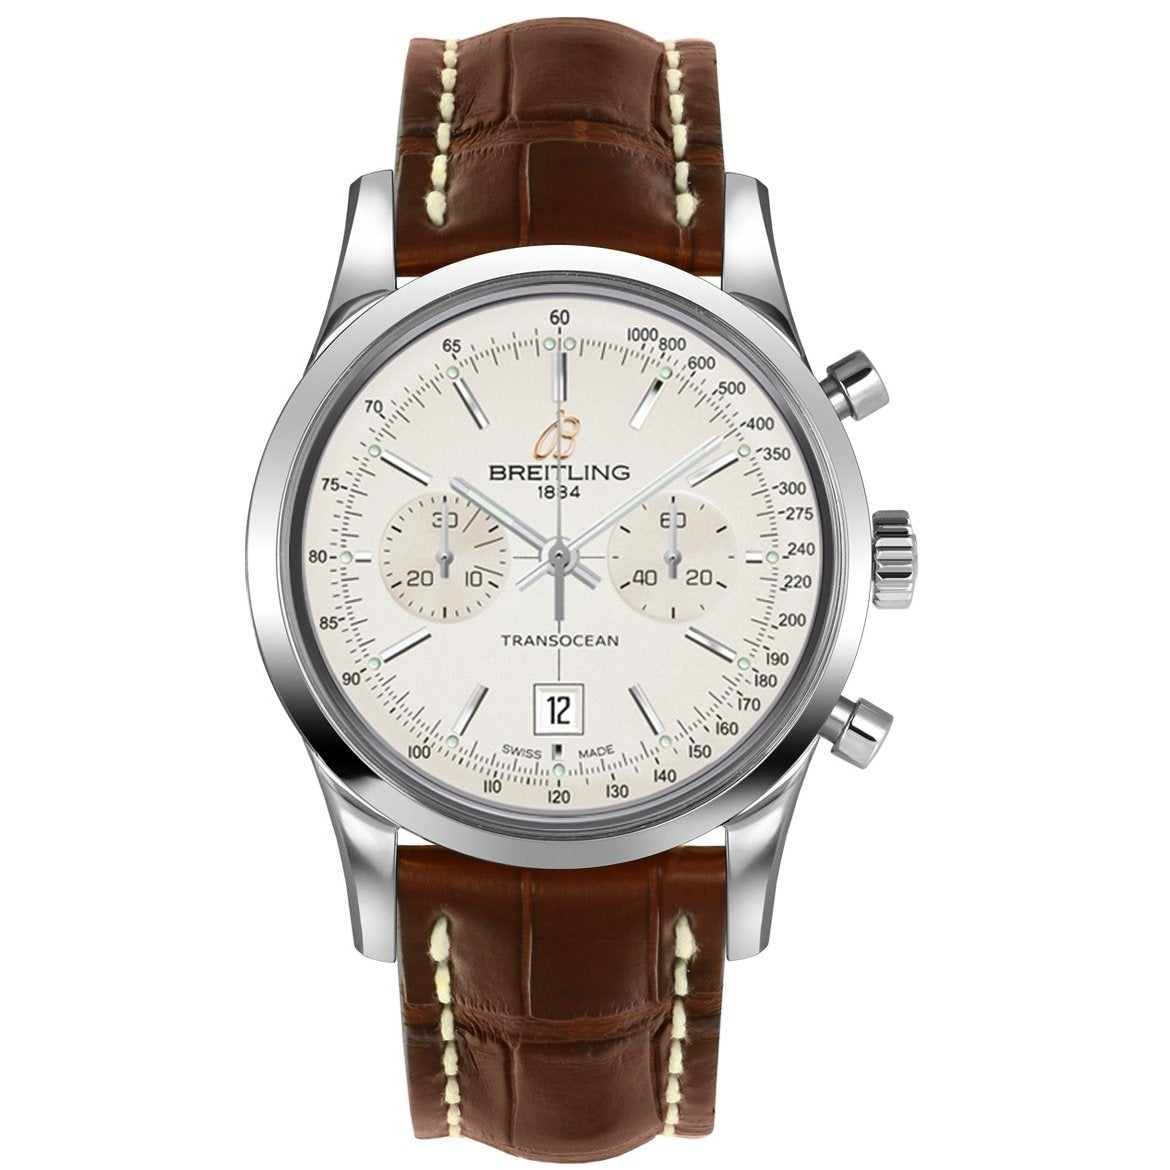 Breitling Men's A4131012-G757-725P Transocean Chronograph Brown Leather Watch